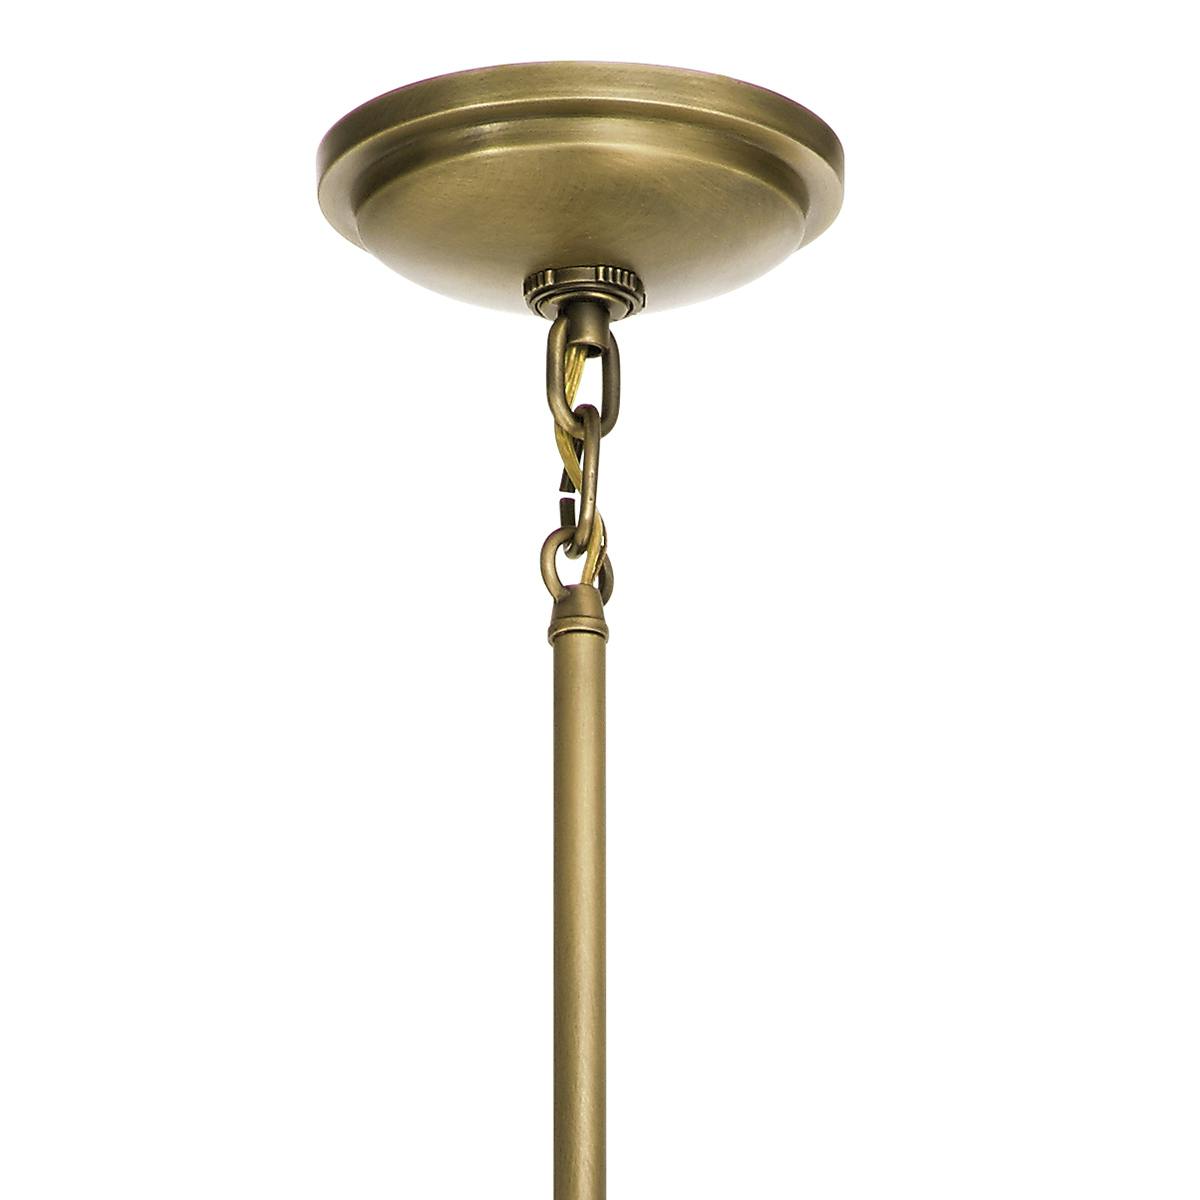 Canopy for the Tollis 12.5" 1 Light Mini Pendant Brass on a white background